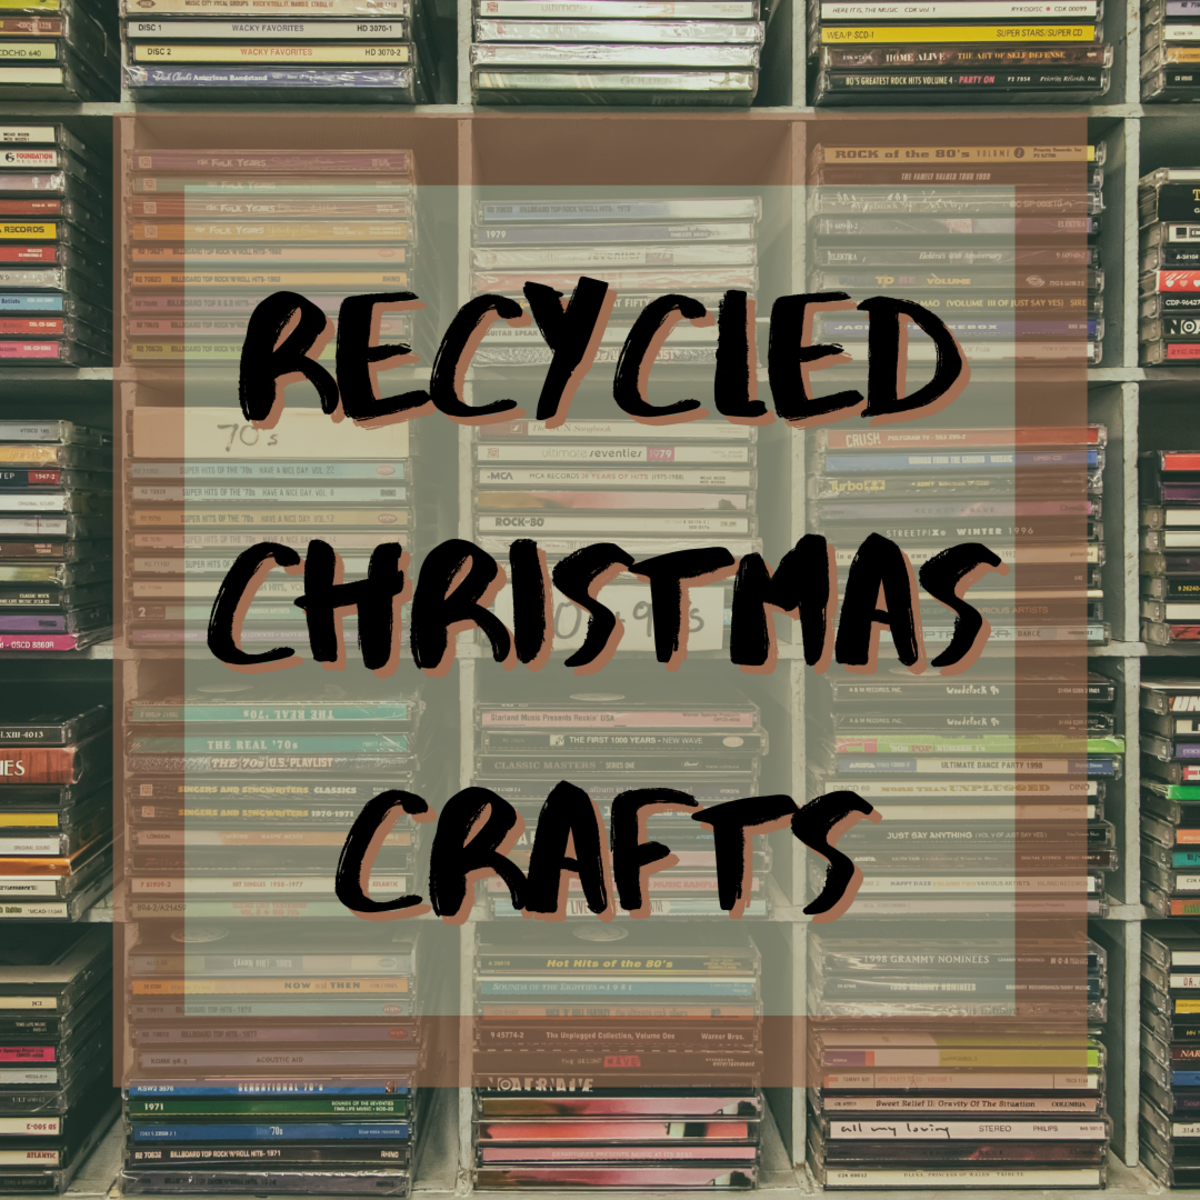 Recycled Christmas Crafts